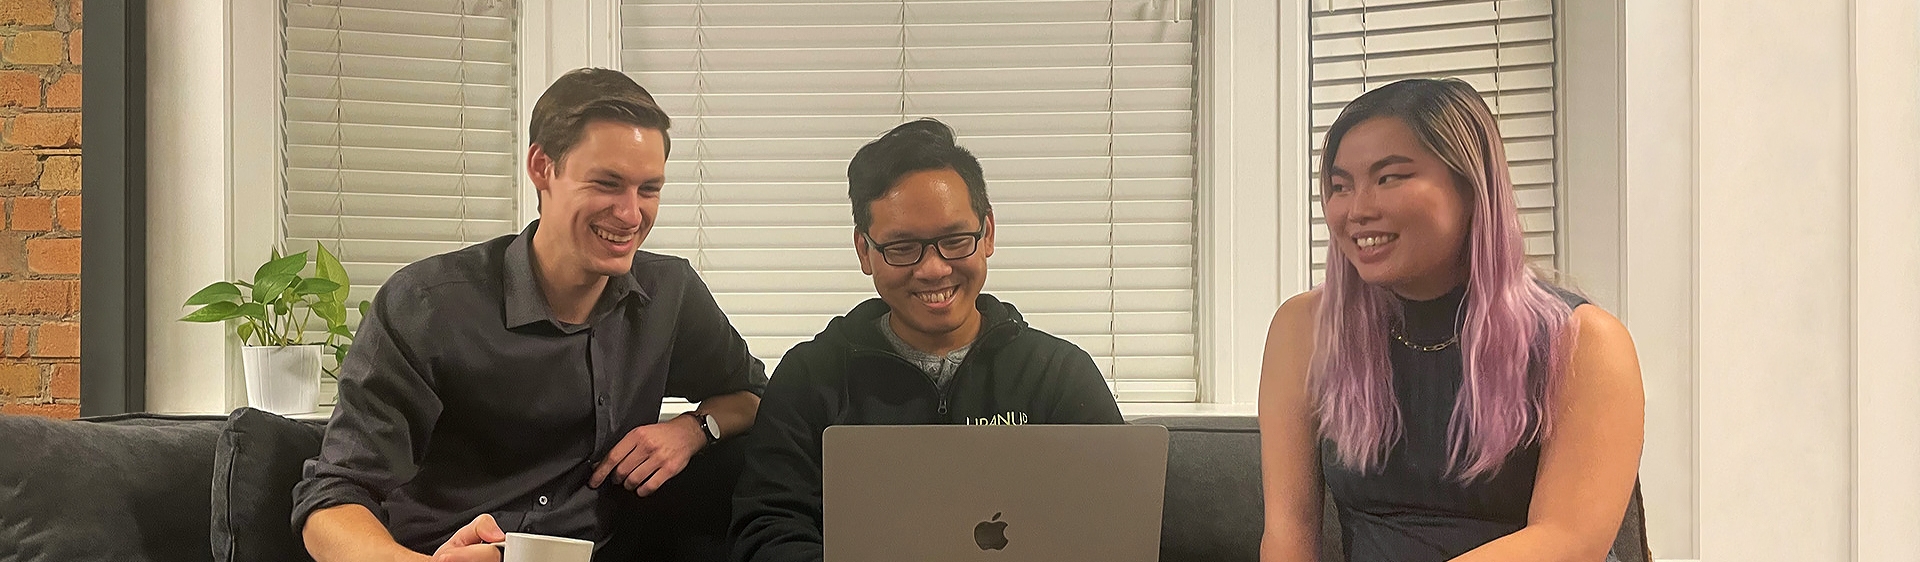 Two men and a woman looking at a laptop screen and smiling